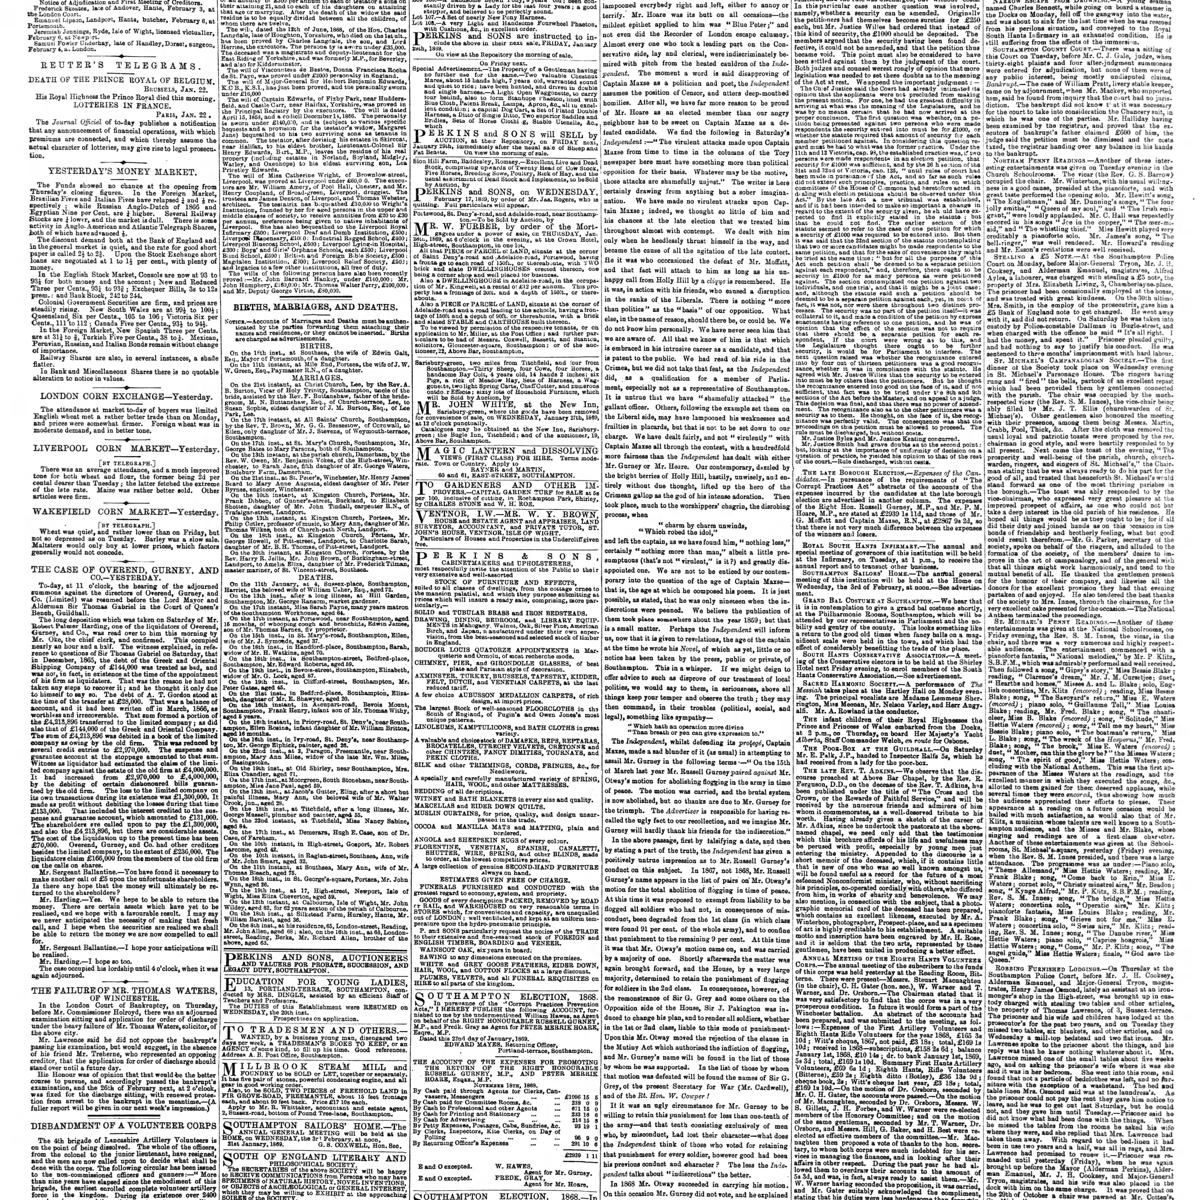 The Hampshire Advertiser, 1869-01-23, page 2